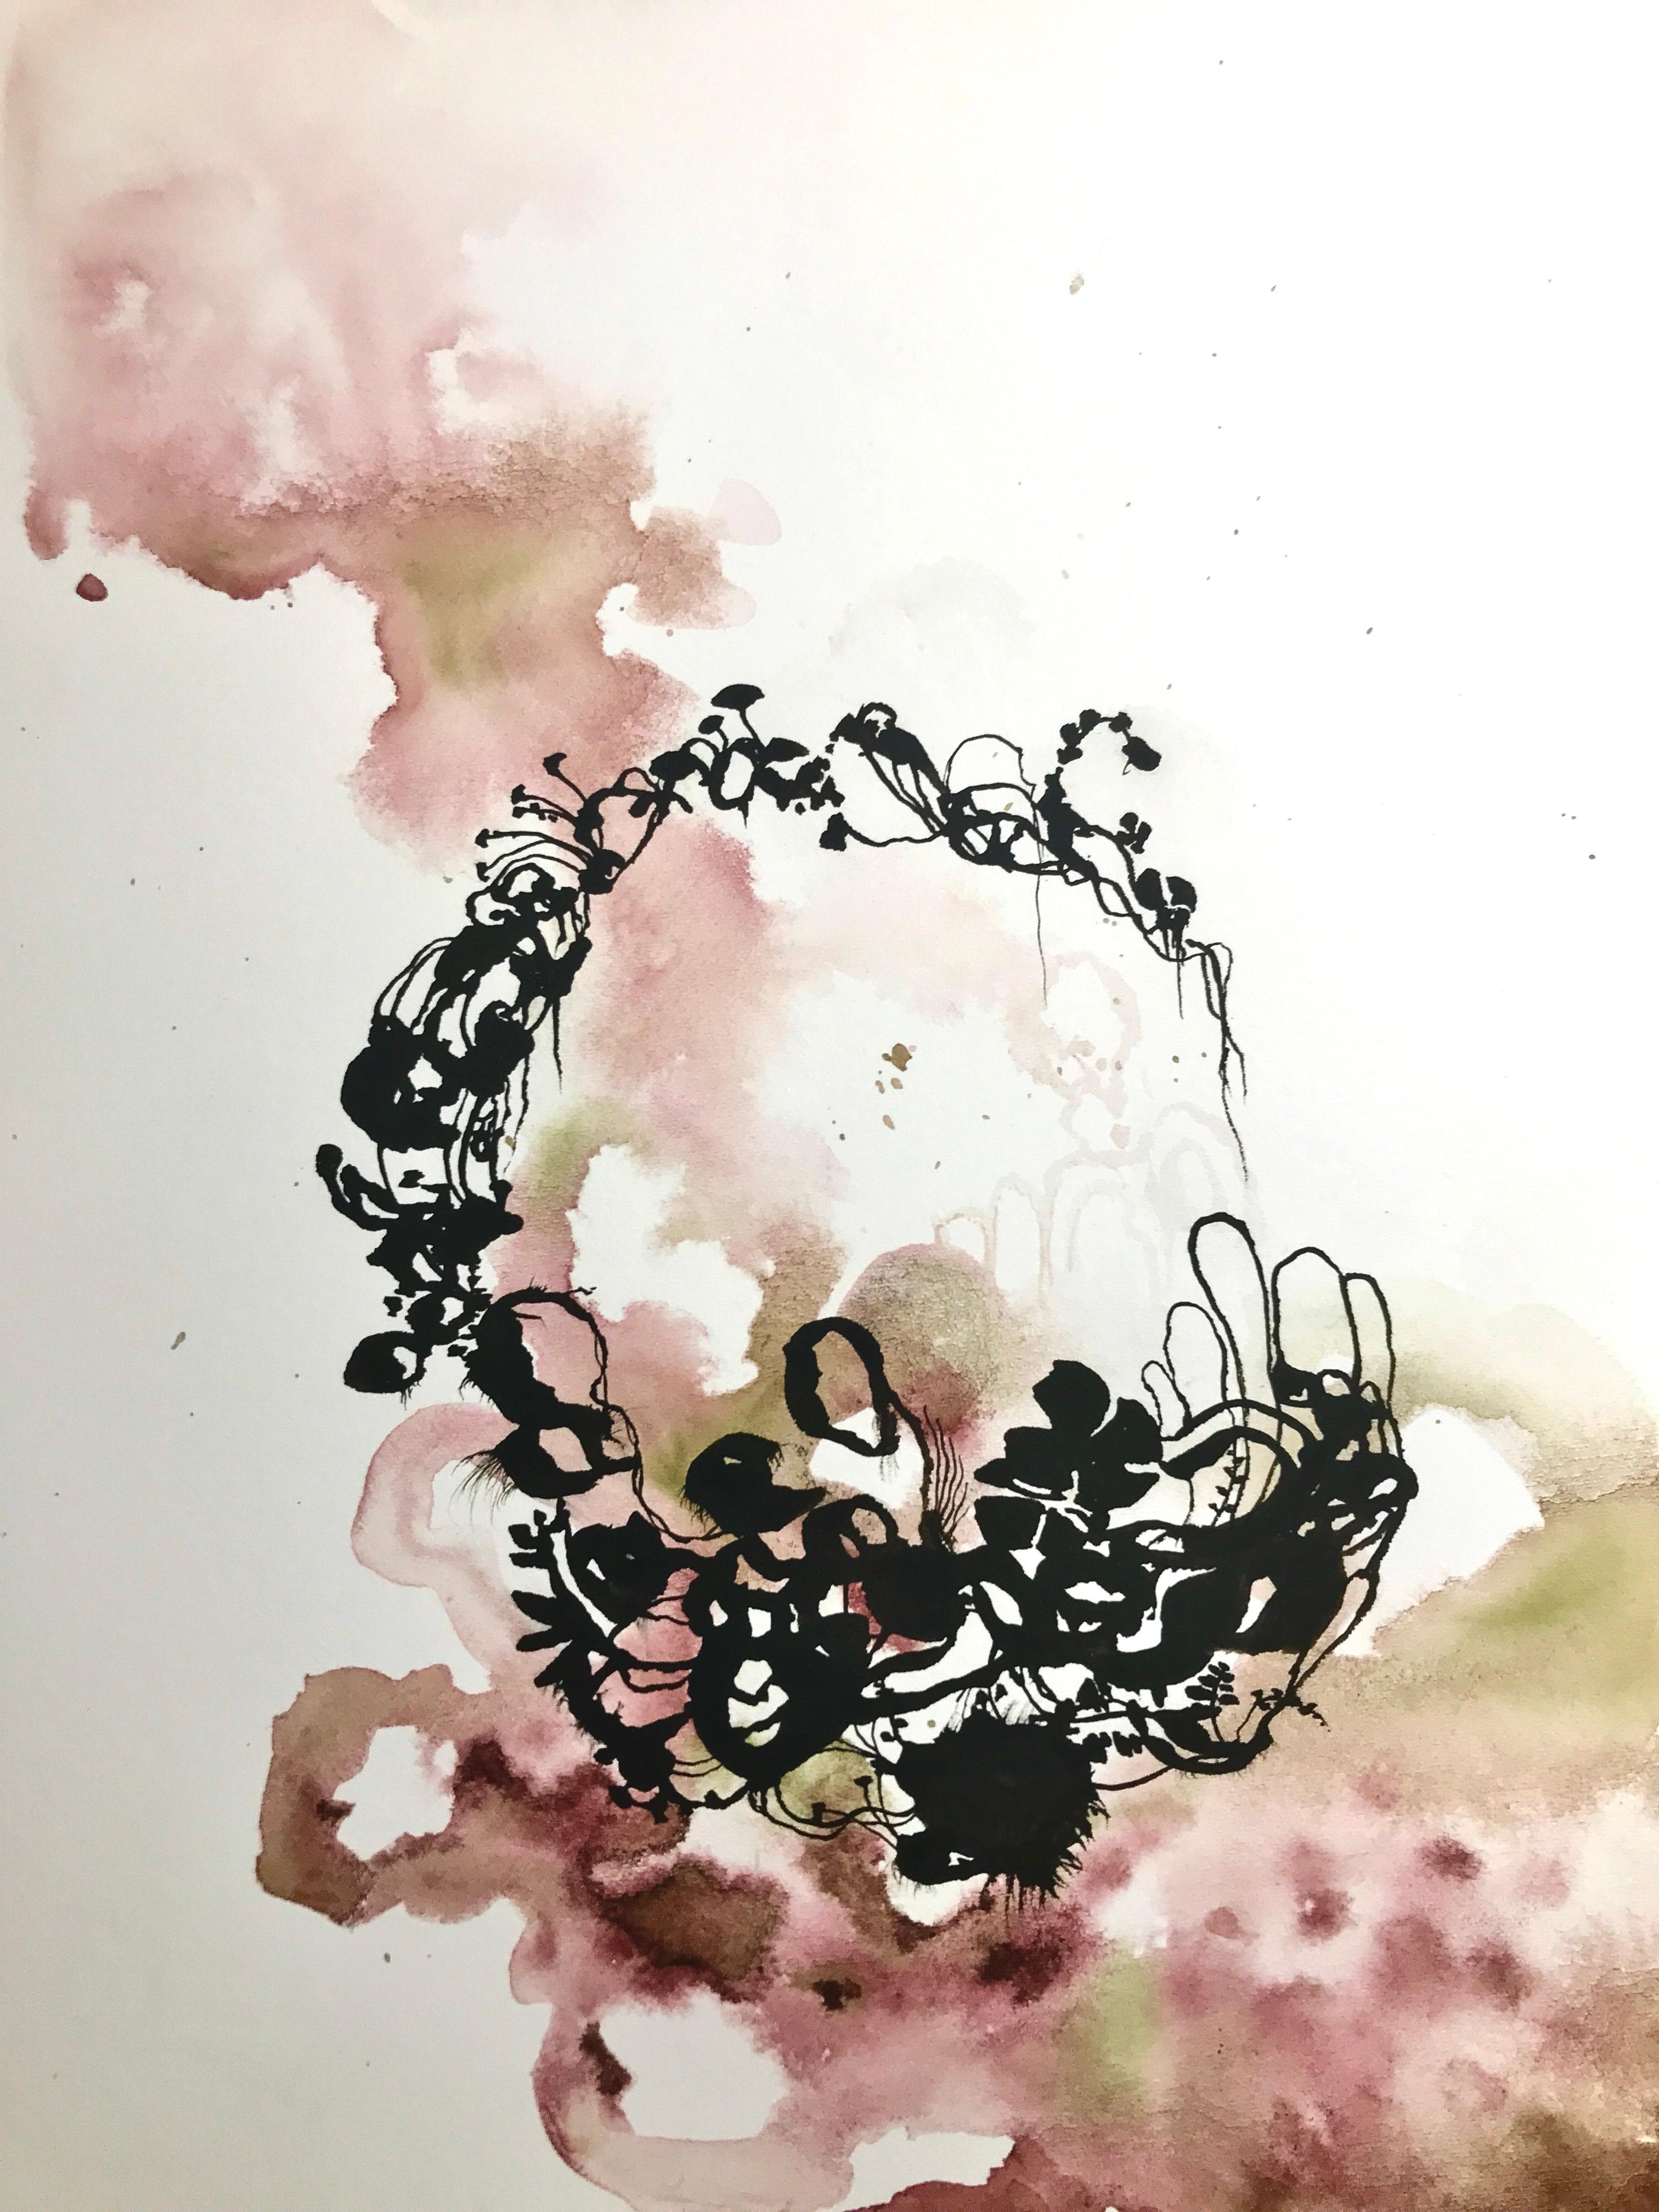 Grayson Chandler Abstract Drawing - "Wreath Study", Watercolor, Abstract, Contemporary Art, Emerging Artist